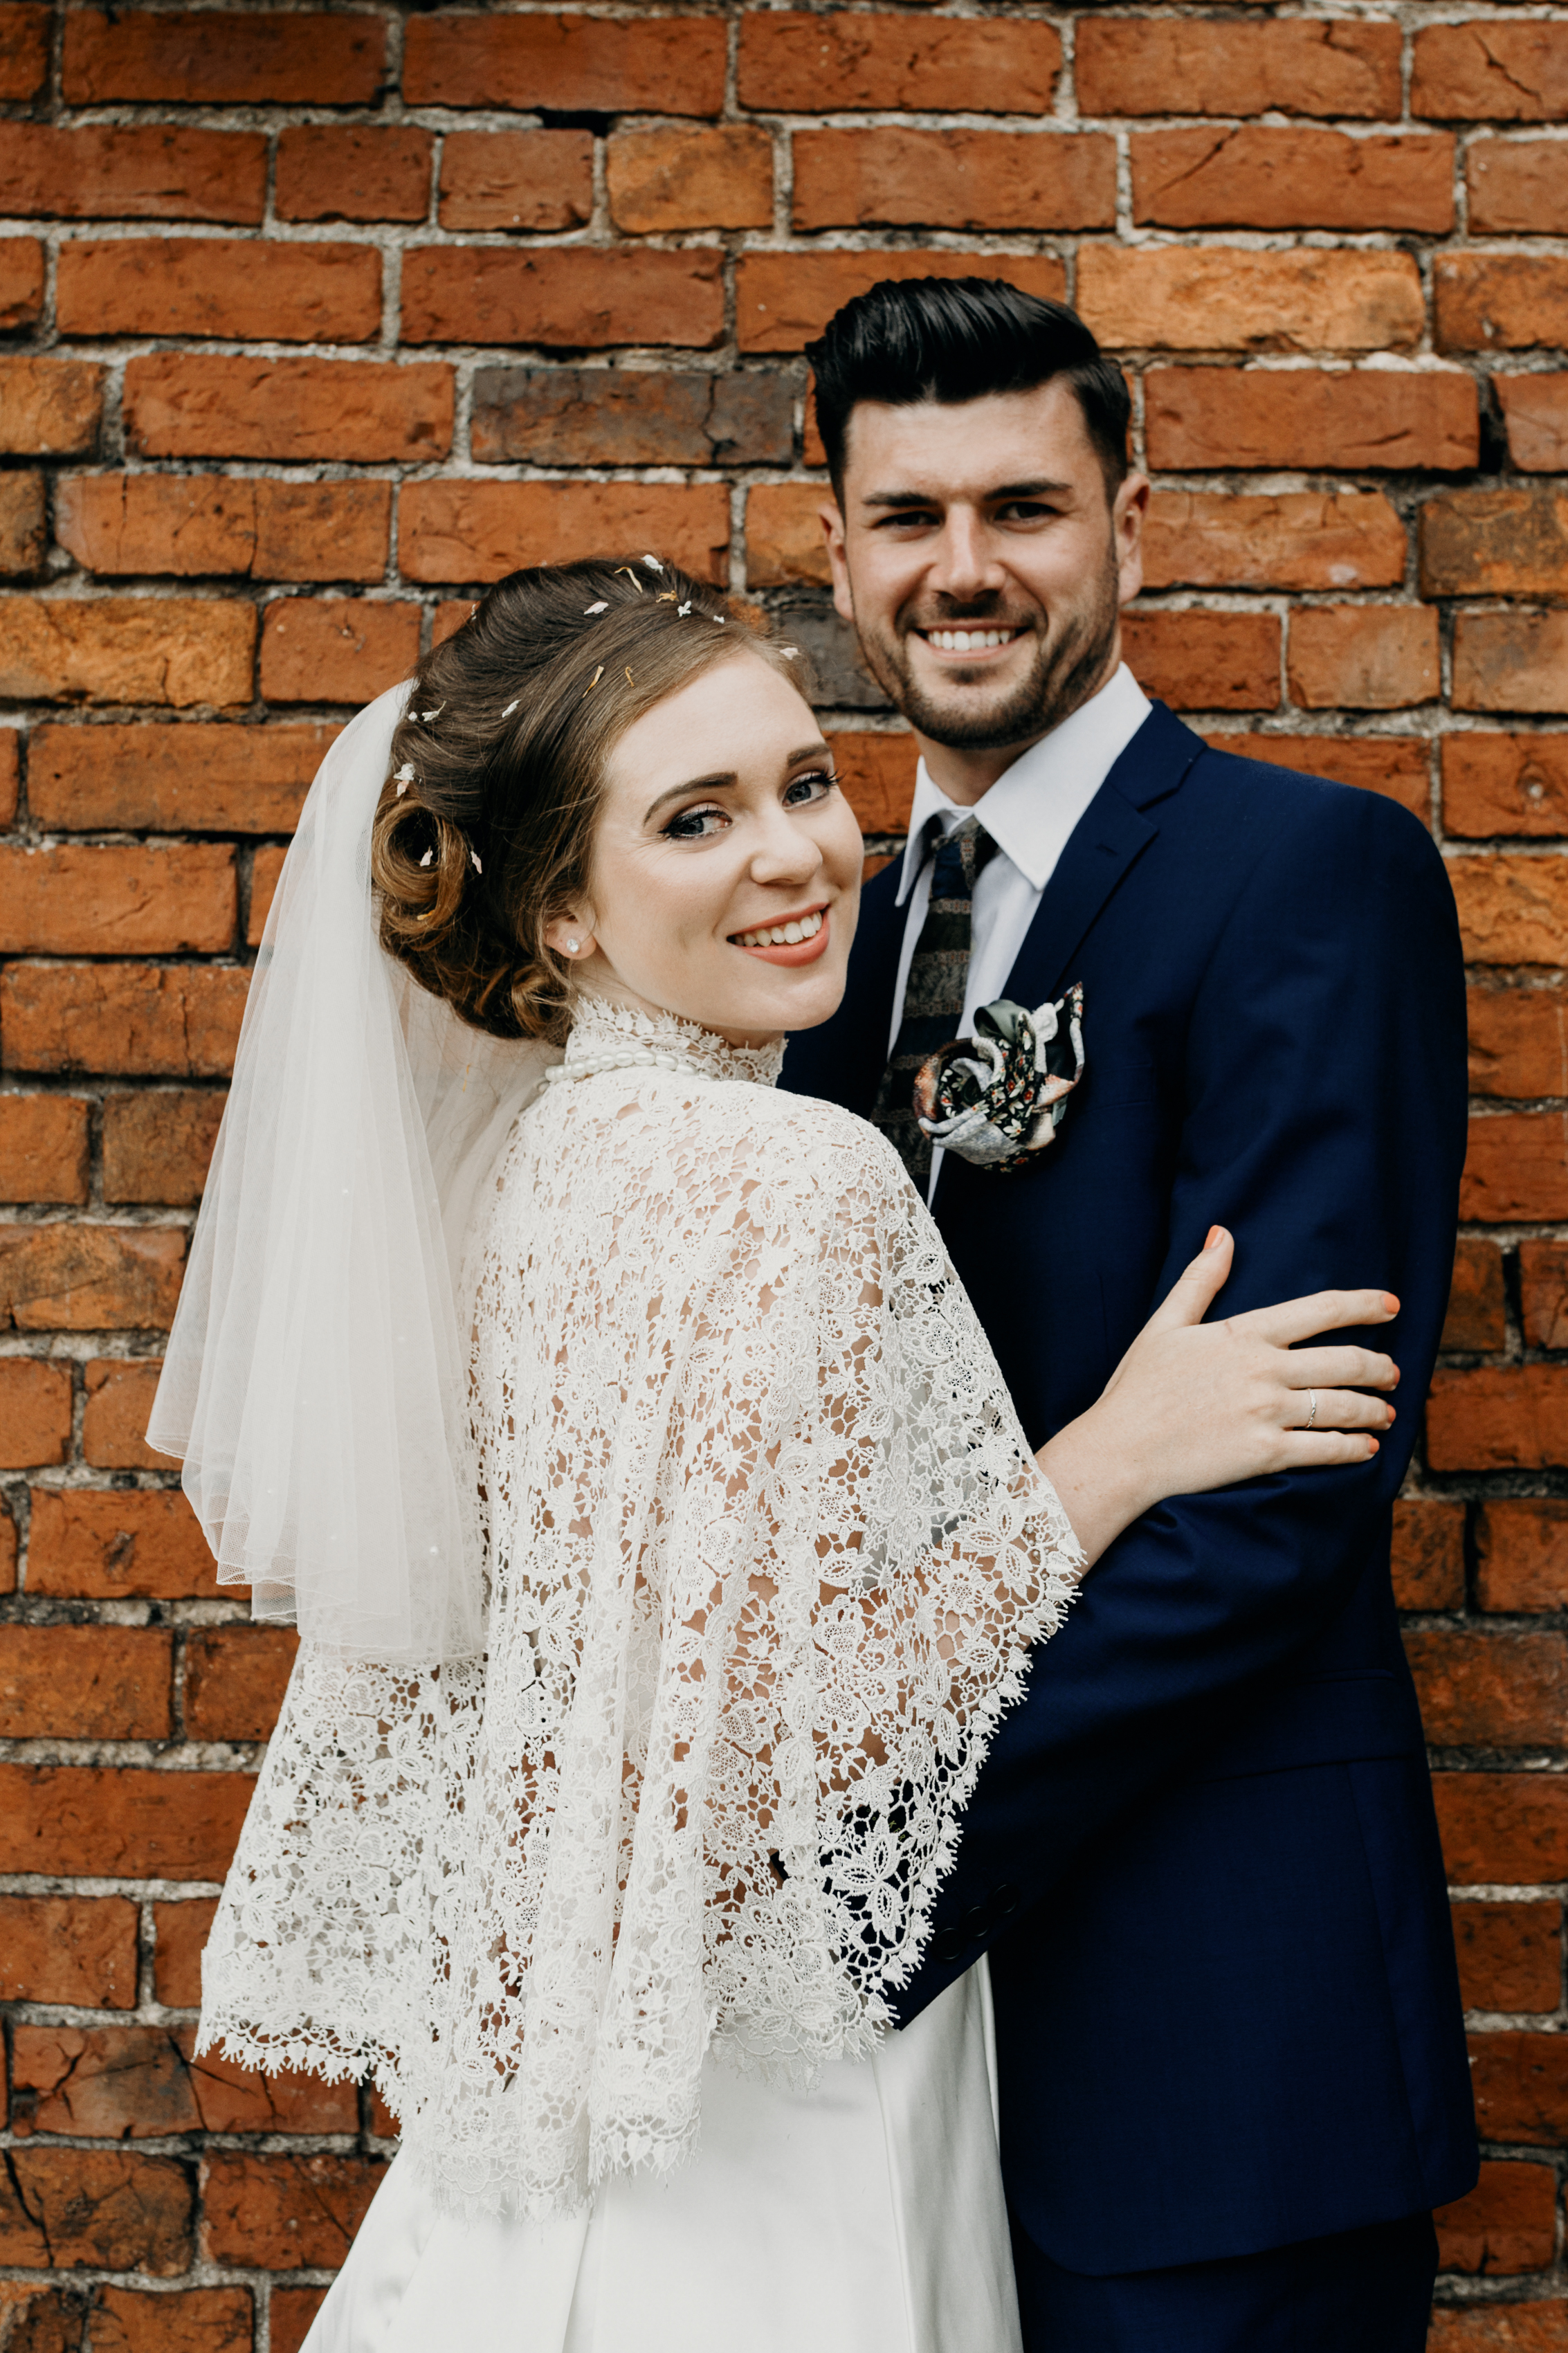 A 1960's Mad Men Inspired Wedding with Modern Vintage Styling